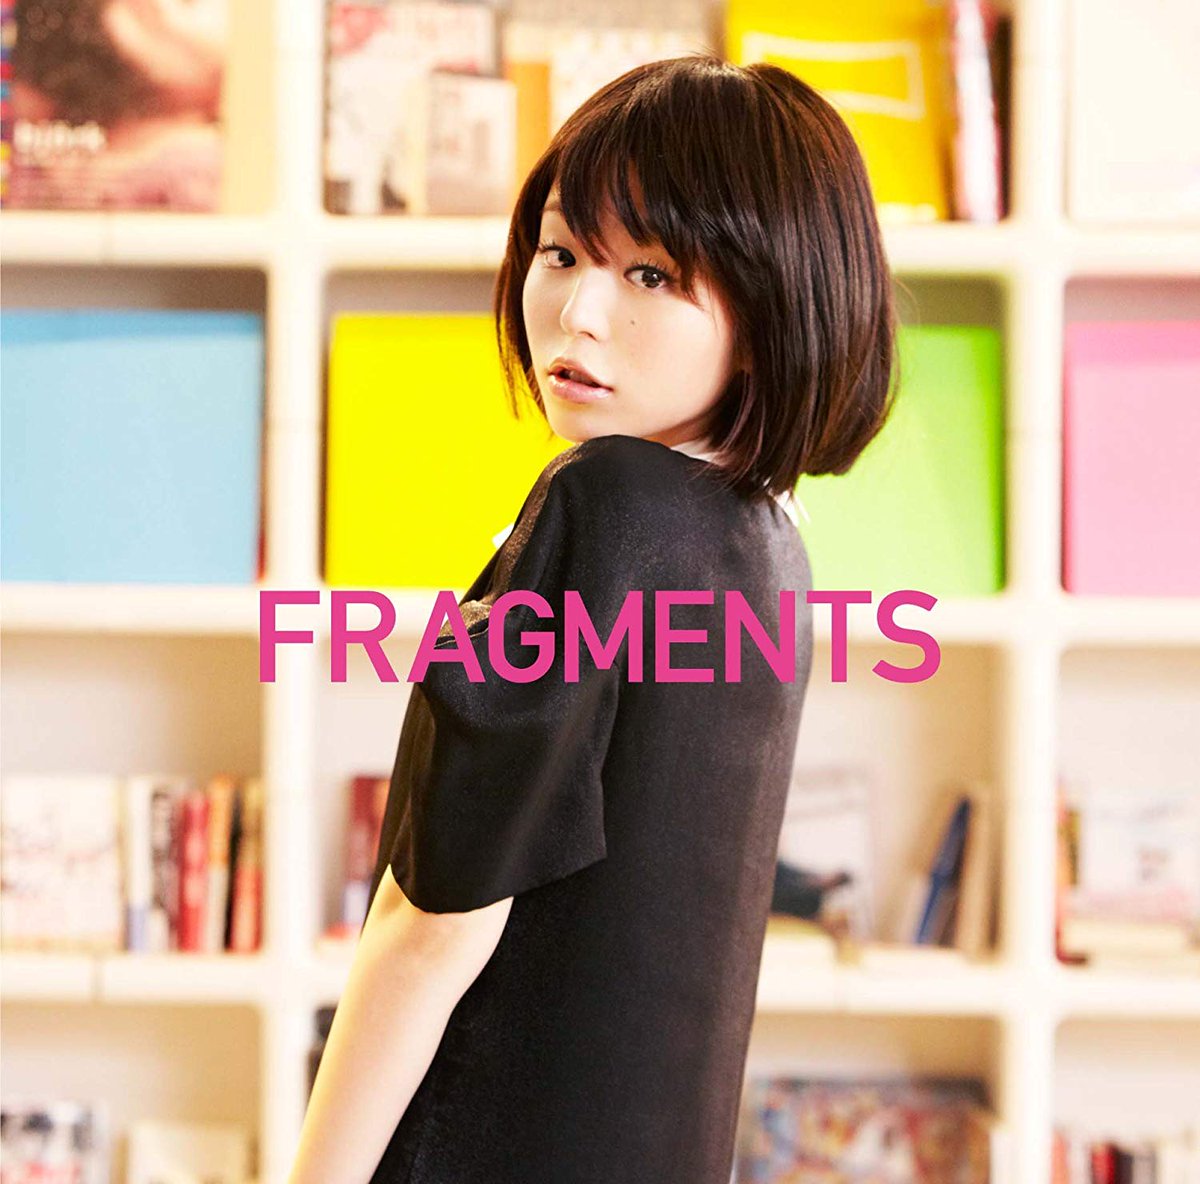 Fragments — Aya HiranoWhat really cemented my taste in J-Pop was hearing Aya Hirano's absolutely godly voice singing in The Melancholy of Haruhi Suzumiya. Quickly found more music of hers. Her voices, the production, all of it holds up 8 years later. This is top tier J-Pop.